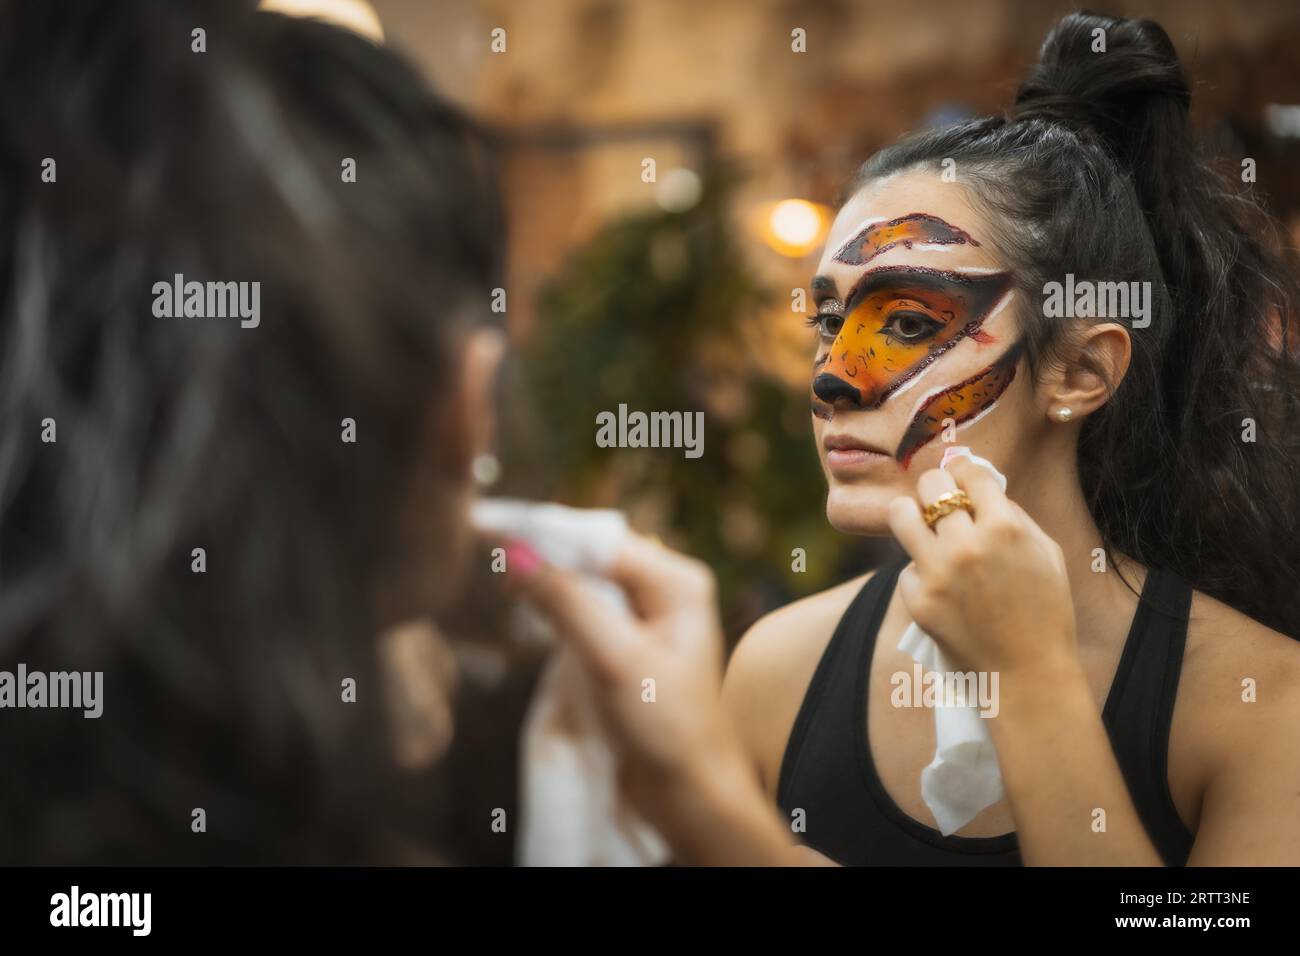 Halloween party hairstyle and makeup preparations, woman with beautiful makeup looking in the mirror Stock Photo